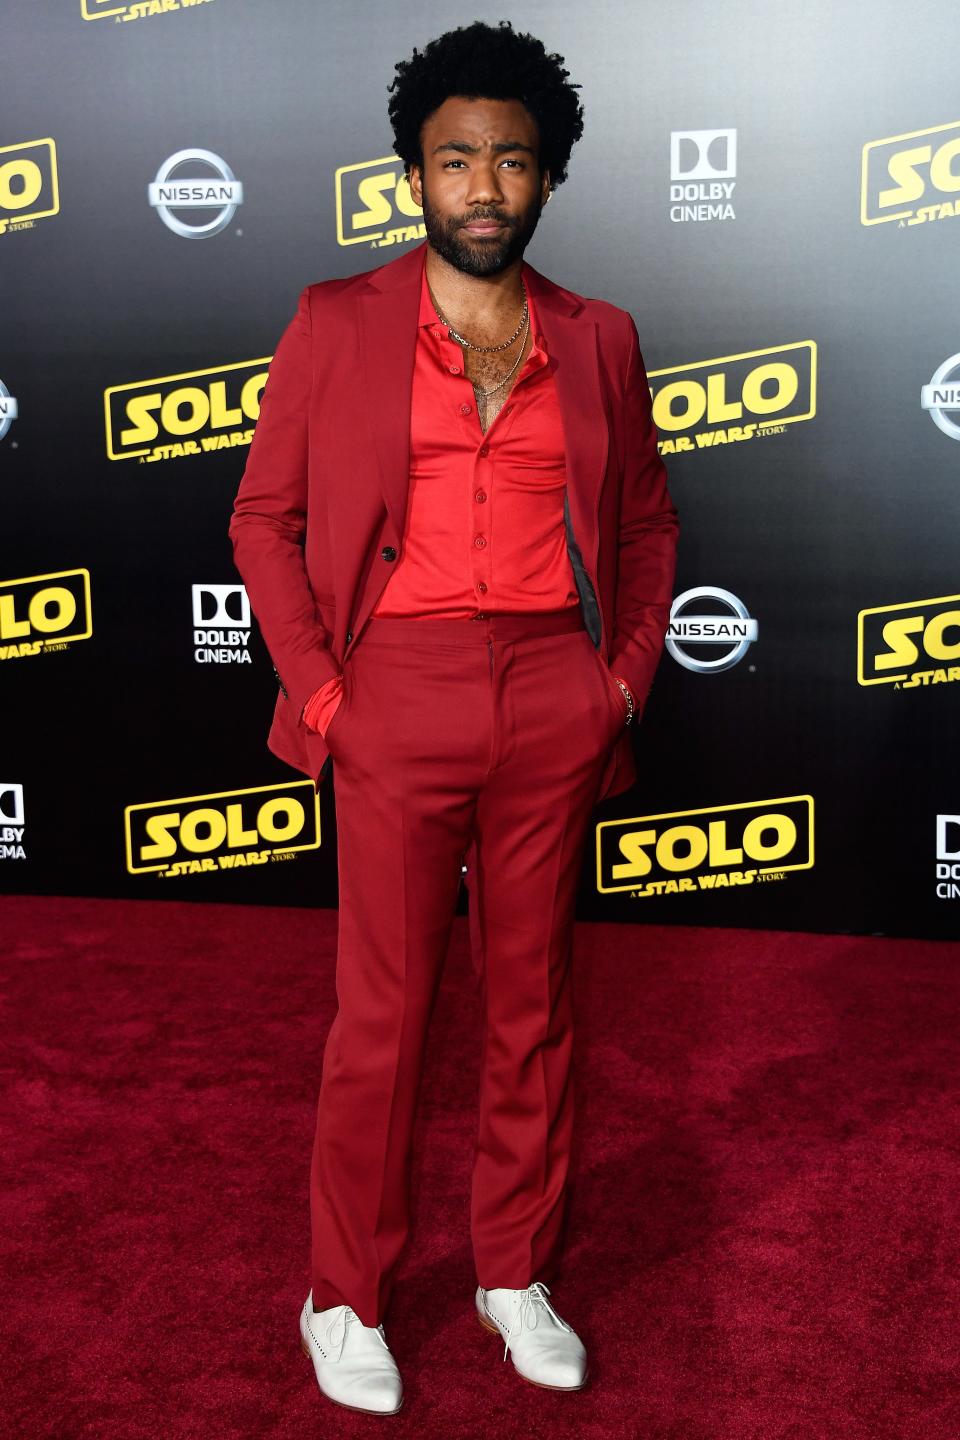 WHO: Donald Glover